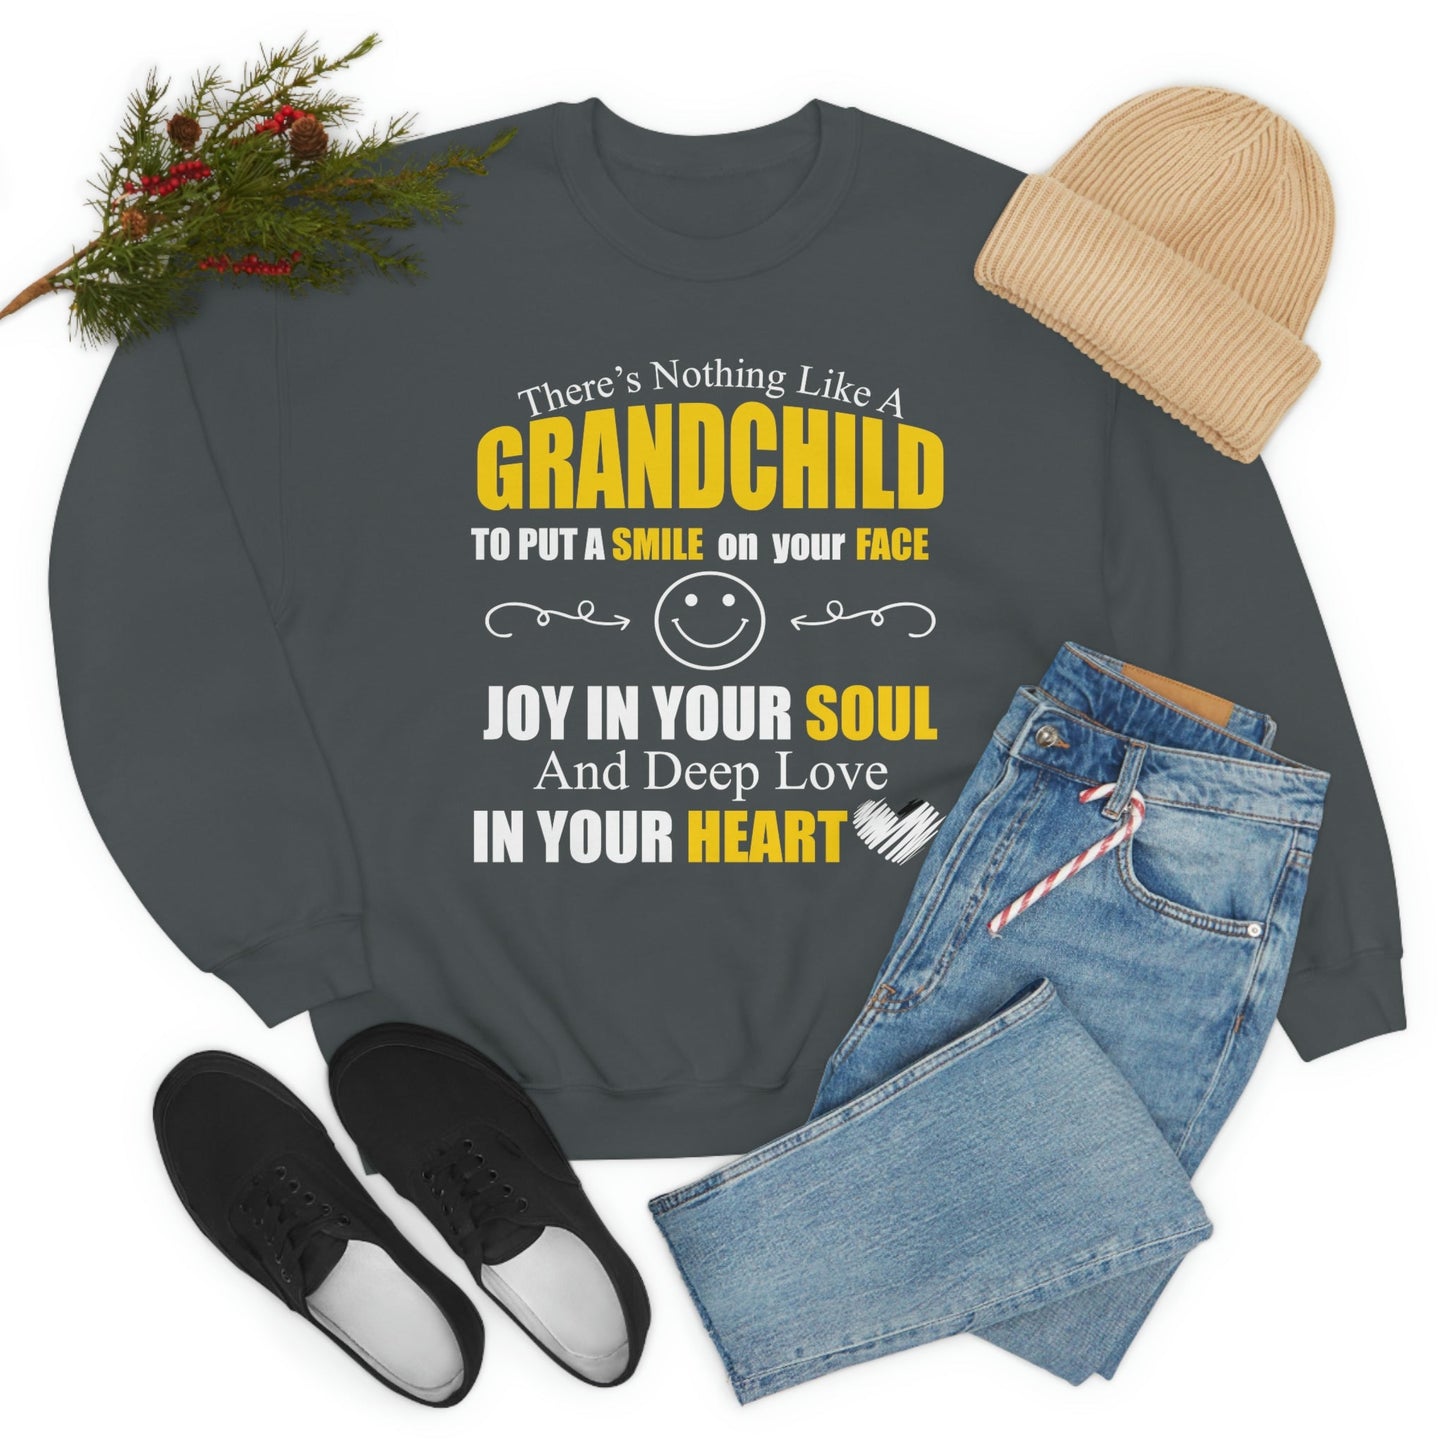 There's Nothing Like a Grandchild Sweat Shirt